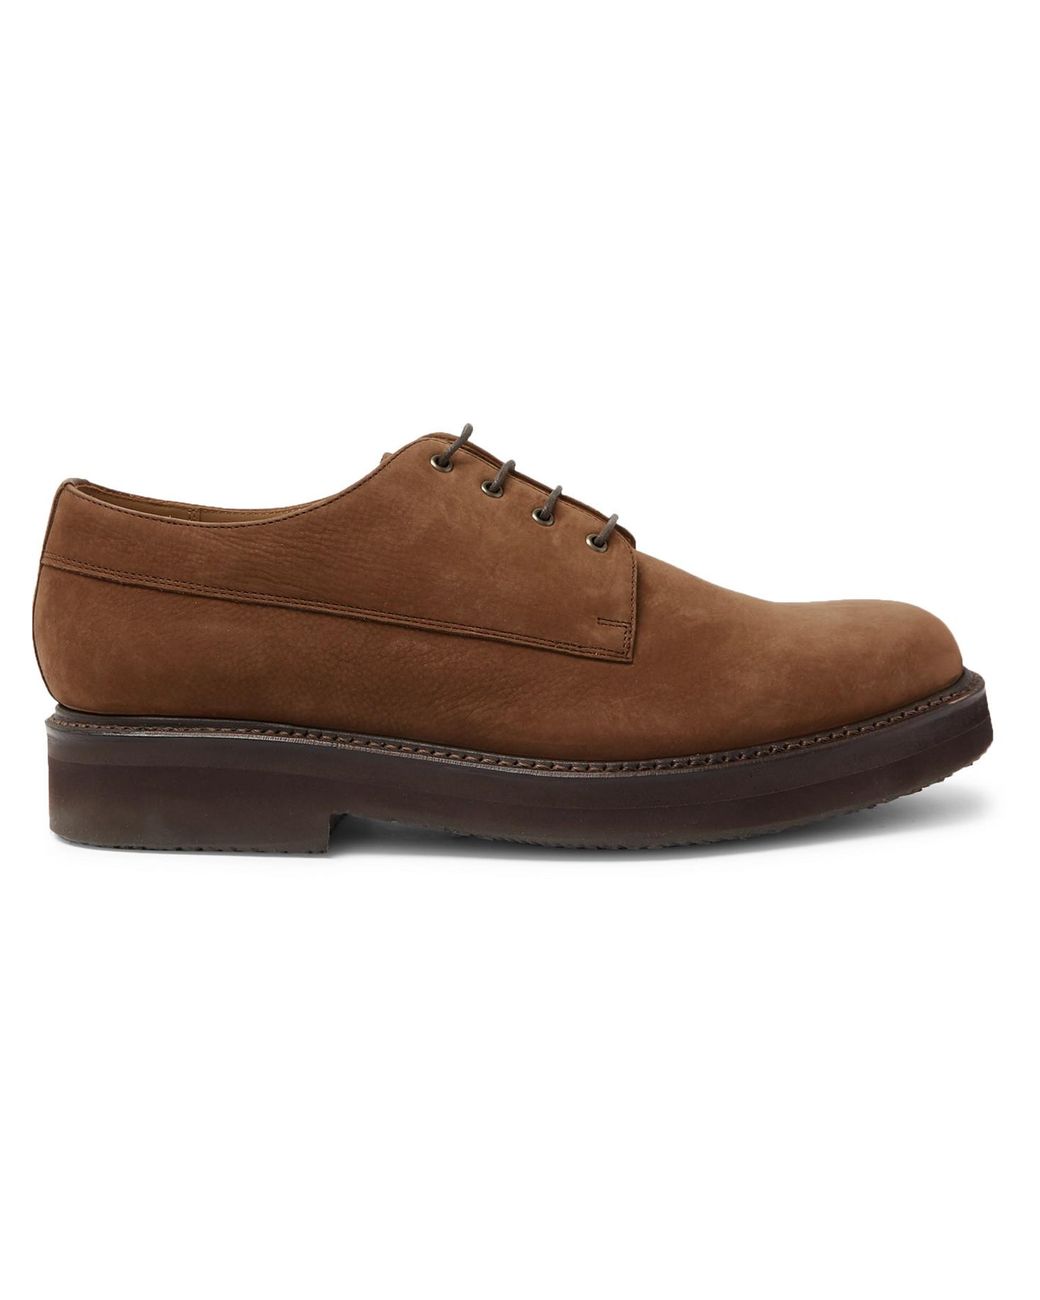 Grenson Hurley Nubuck Derby Shoes in Brown for Men - Lyst